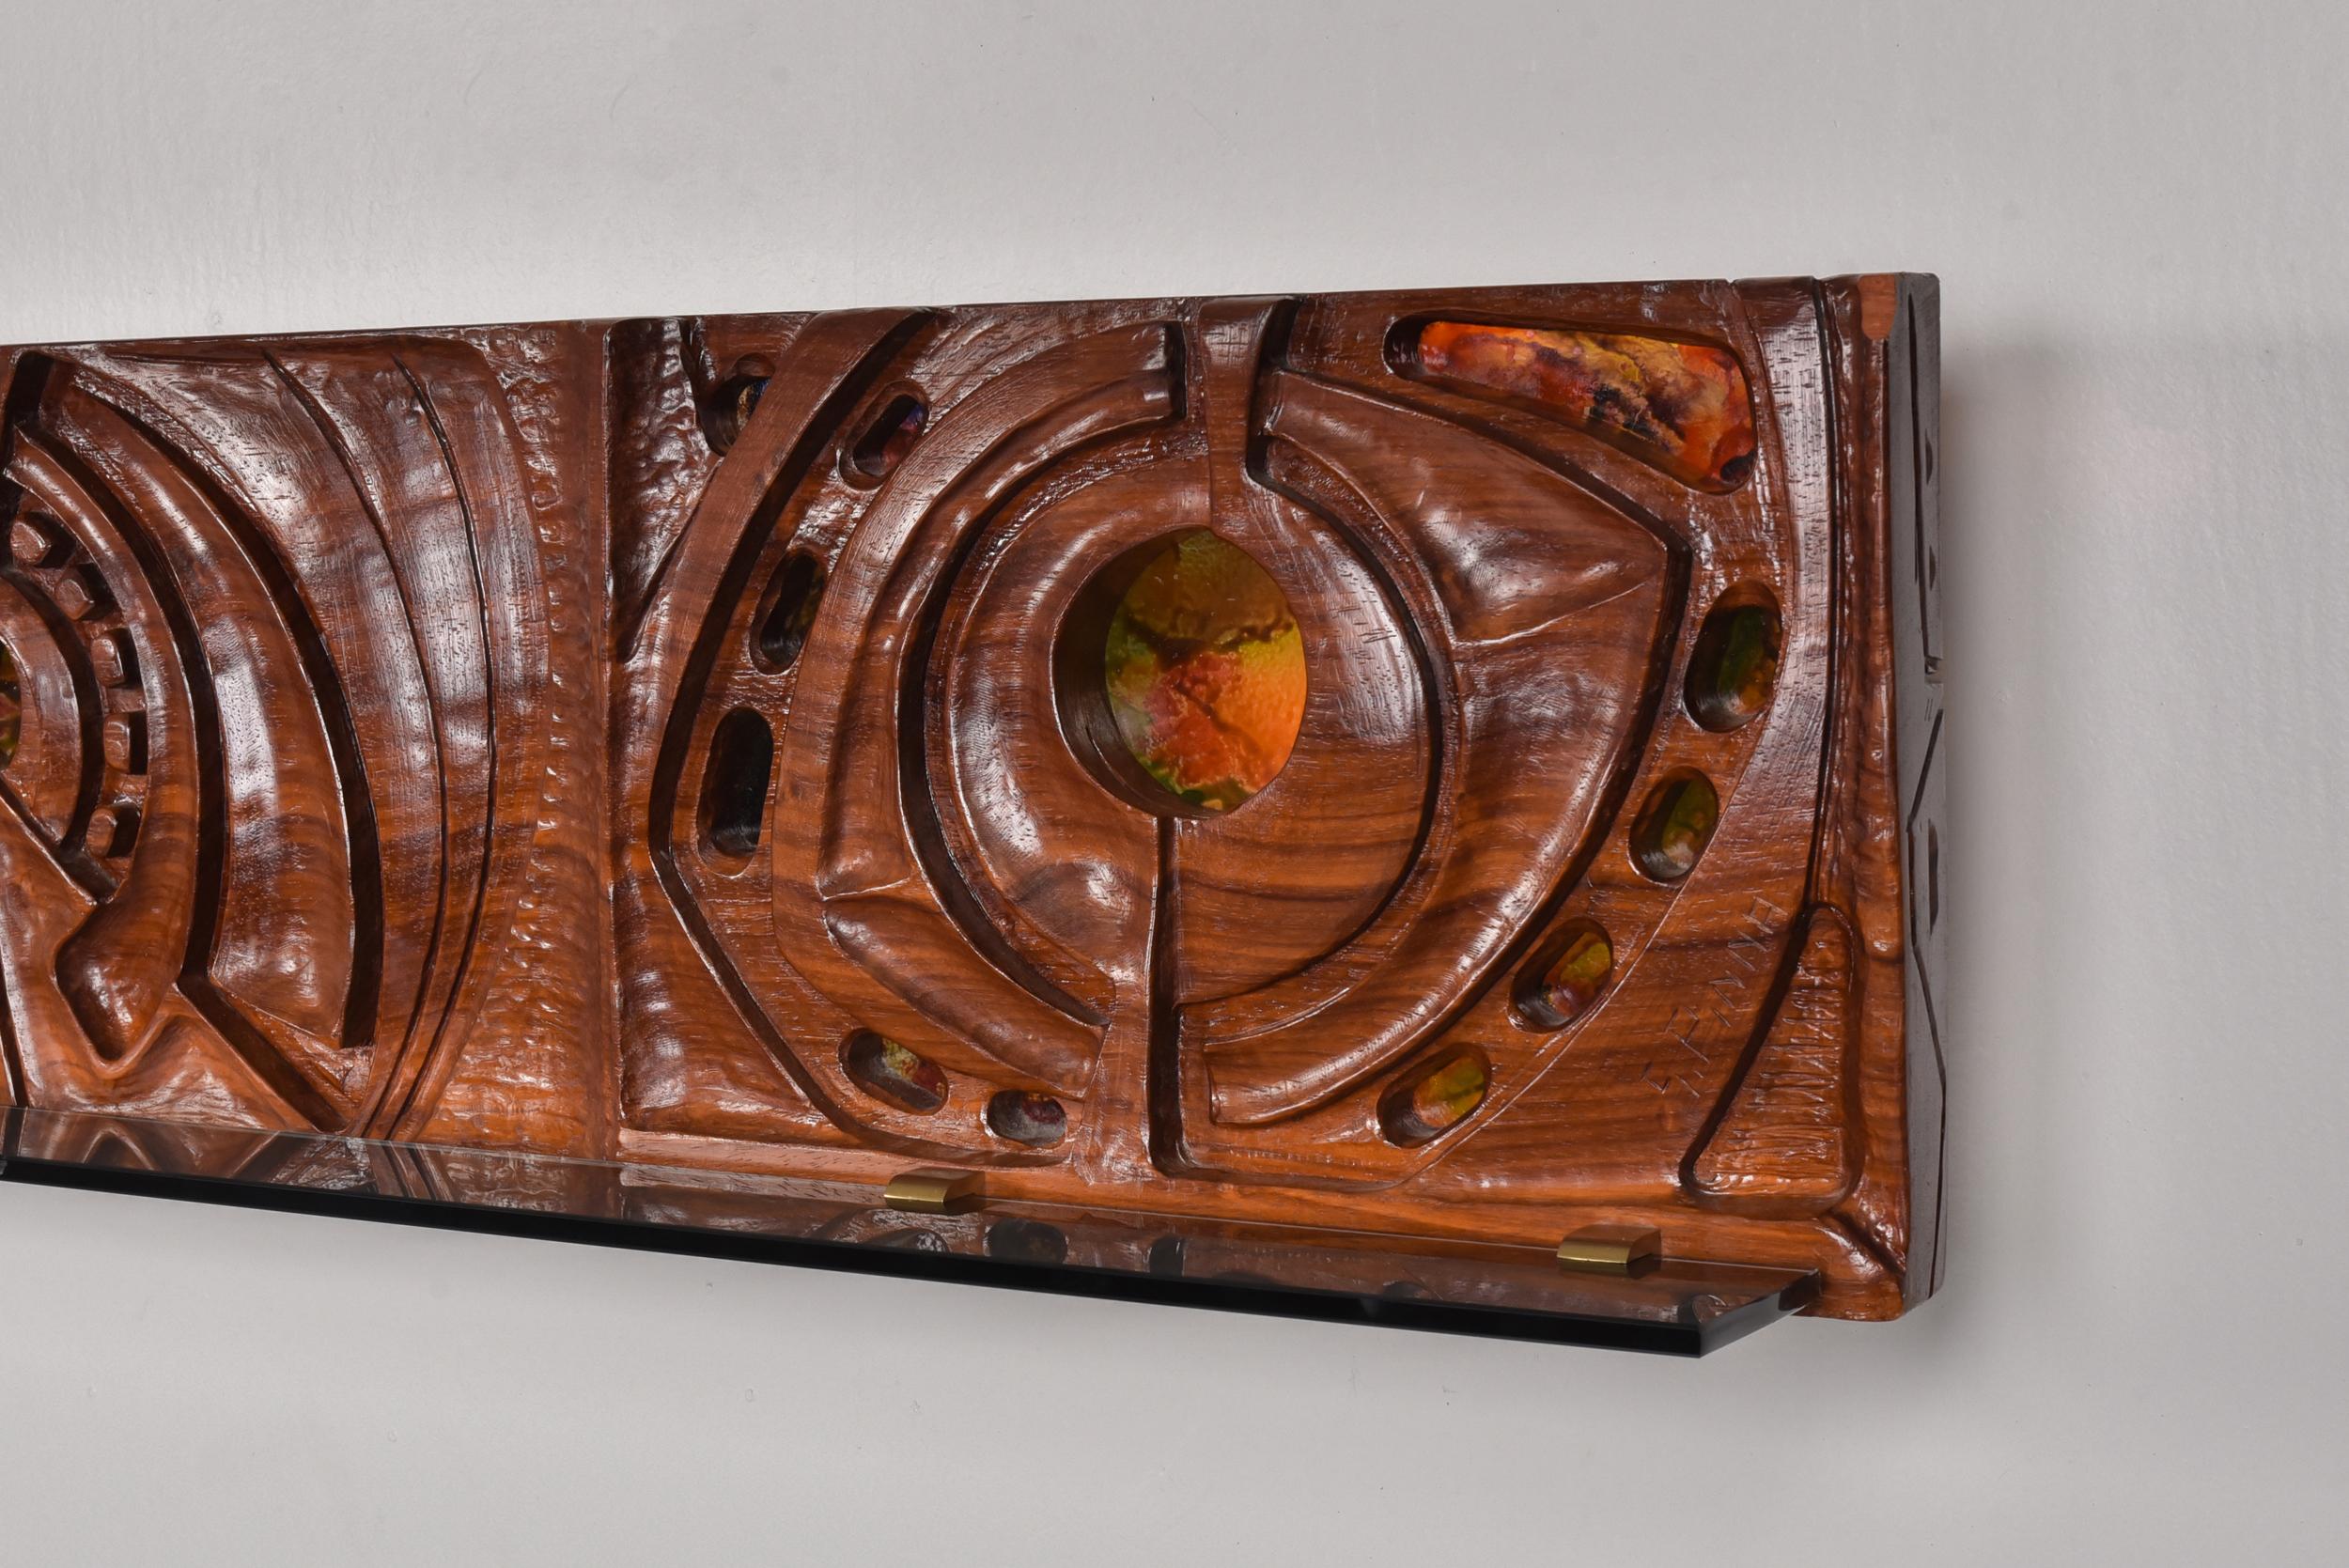 S. Pinna; Wooden; Wall Piece; Art Piece; Italian; Mid Century; Craftmanship

Hand-crafted wooden wall piece. The carefully crafted details create depth and hold a historical value.
 